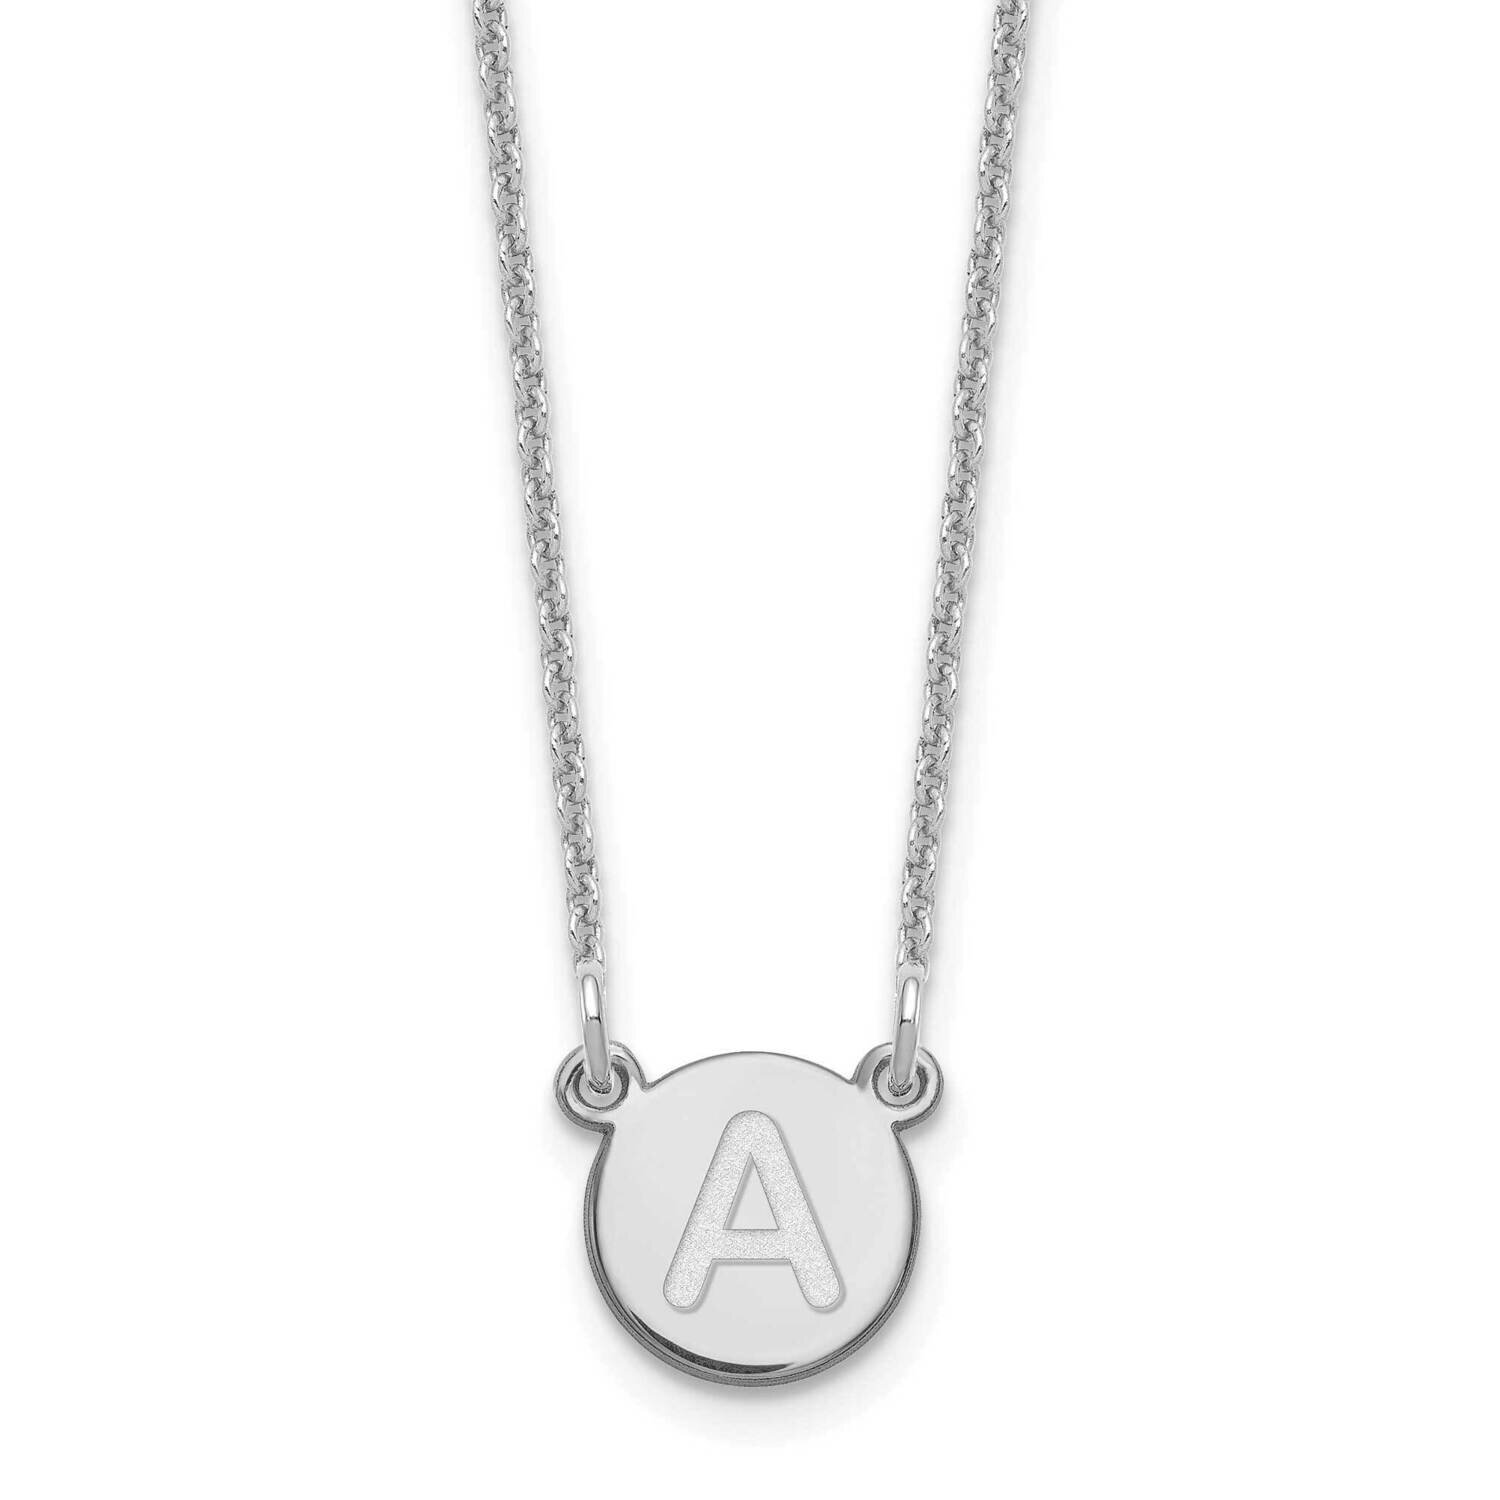 Tiny Circle Block Initial Letter A Necklace 14k White Gold XNA722W/A